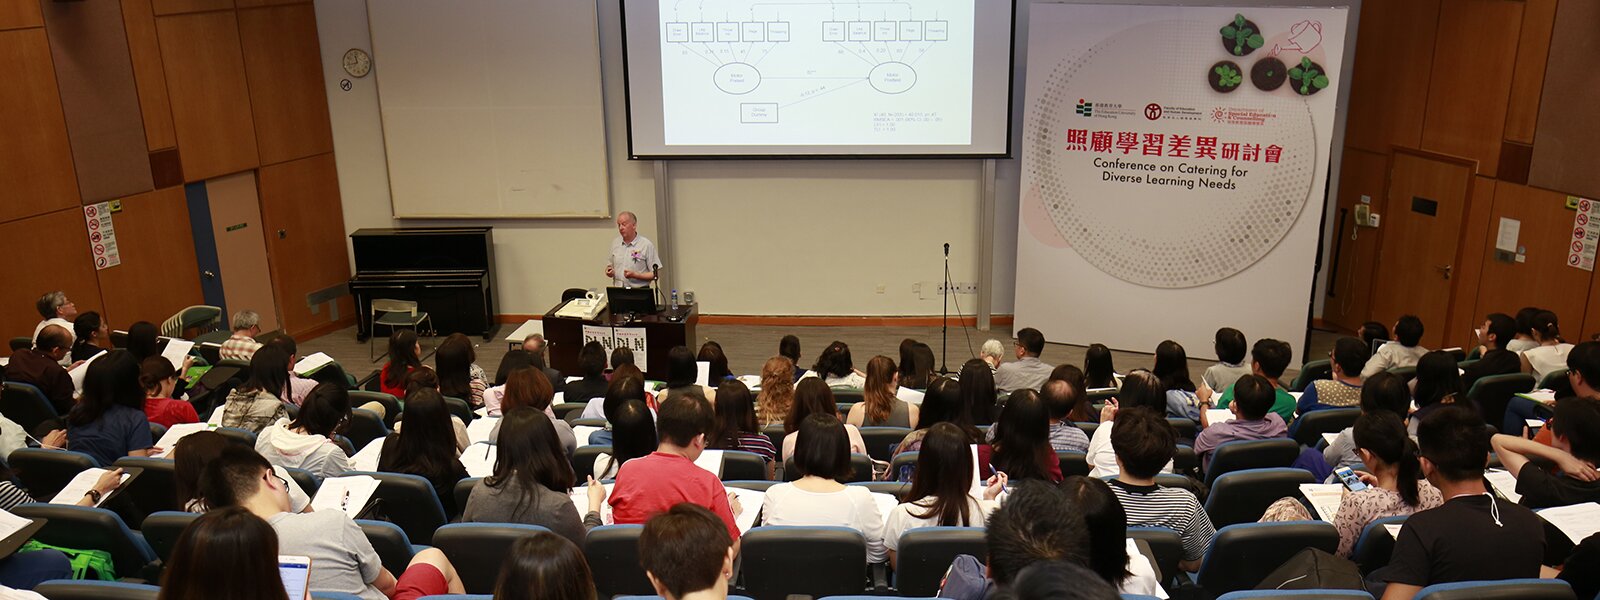 EdUHK Conference on Catering for Diverse Learning Needs